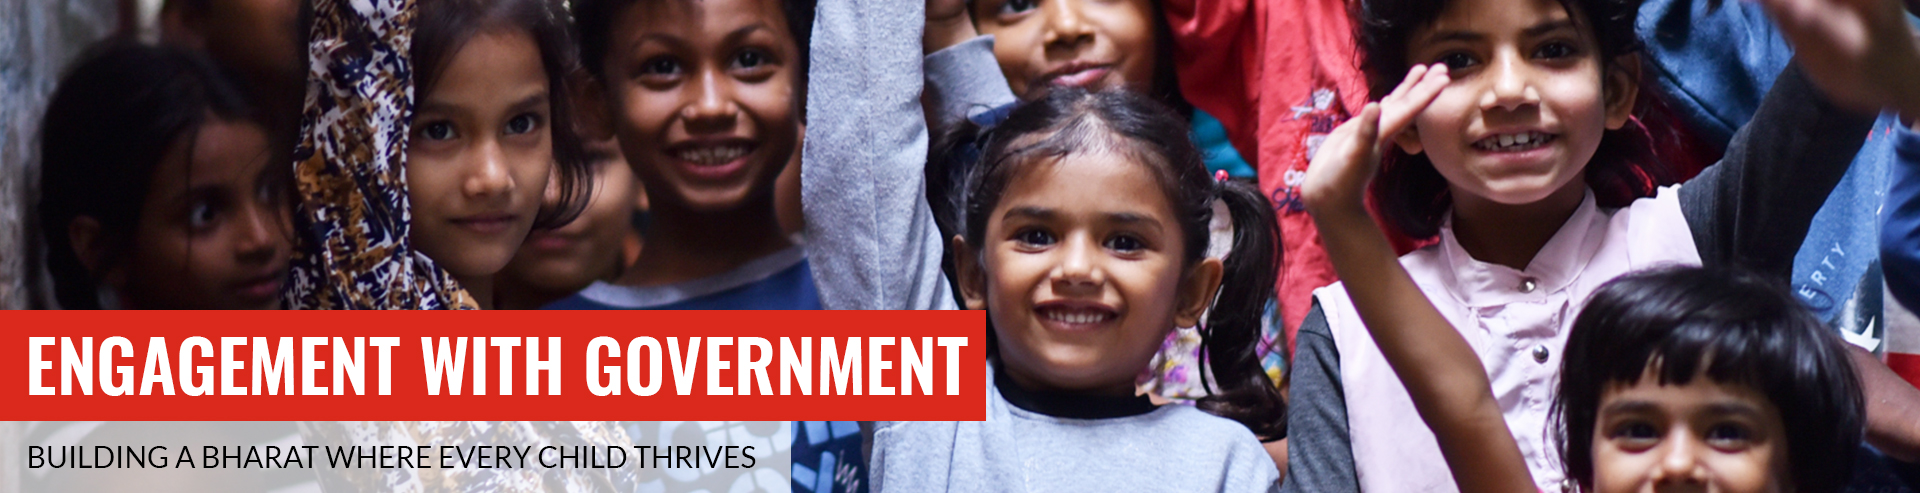 Working With Government | Save the Children